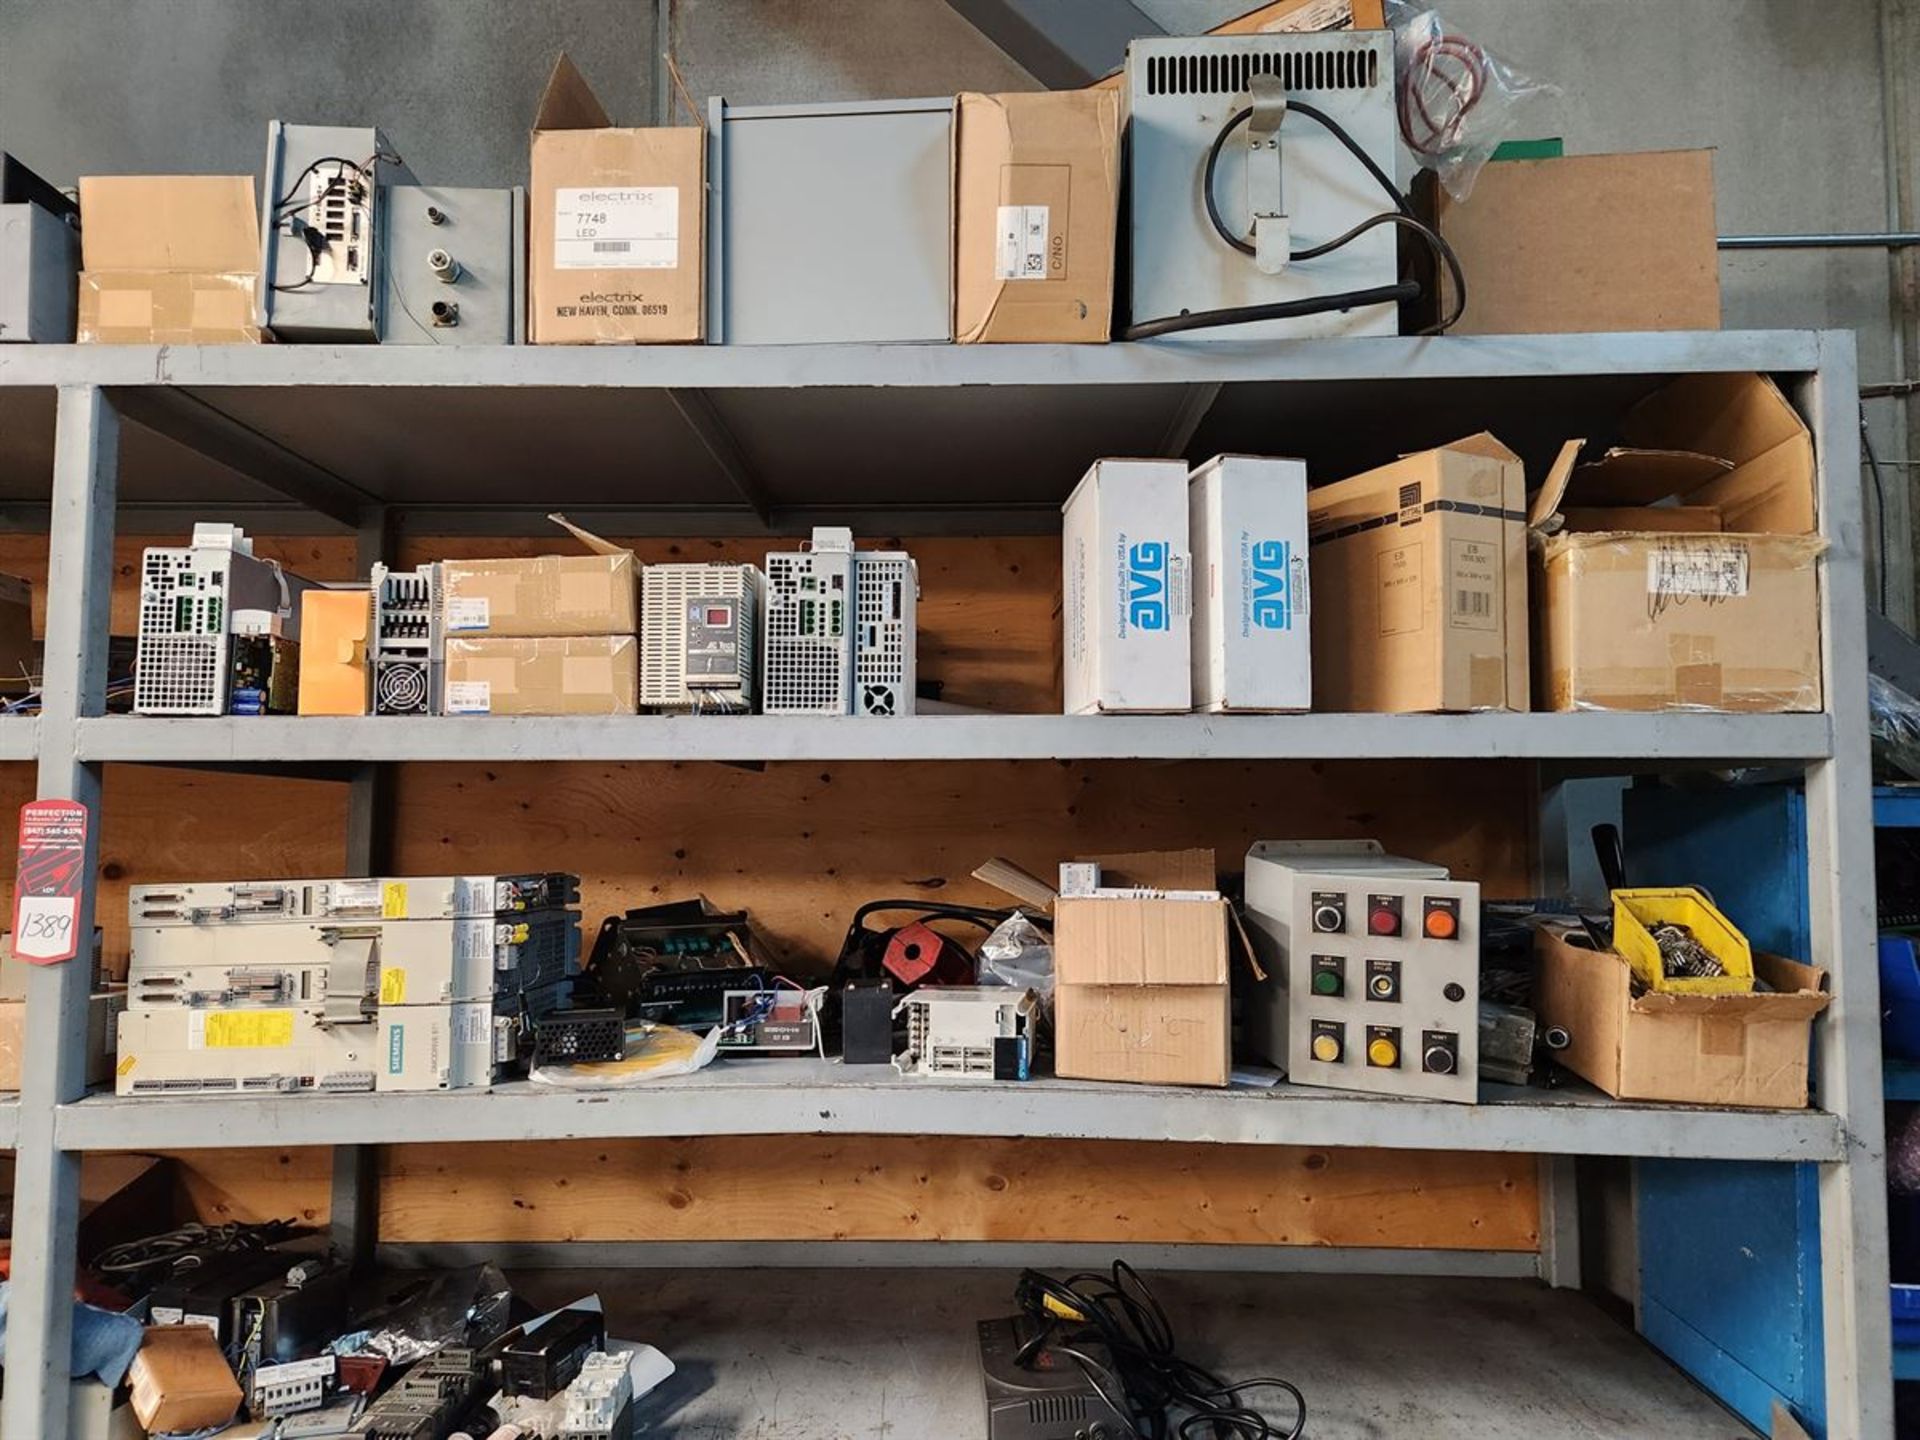 Steel Shelving w/ Electrical Contents, includes: Motors, Cables, Switches, Modules, etc. - Image 3 of 5